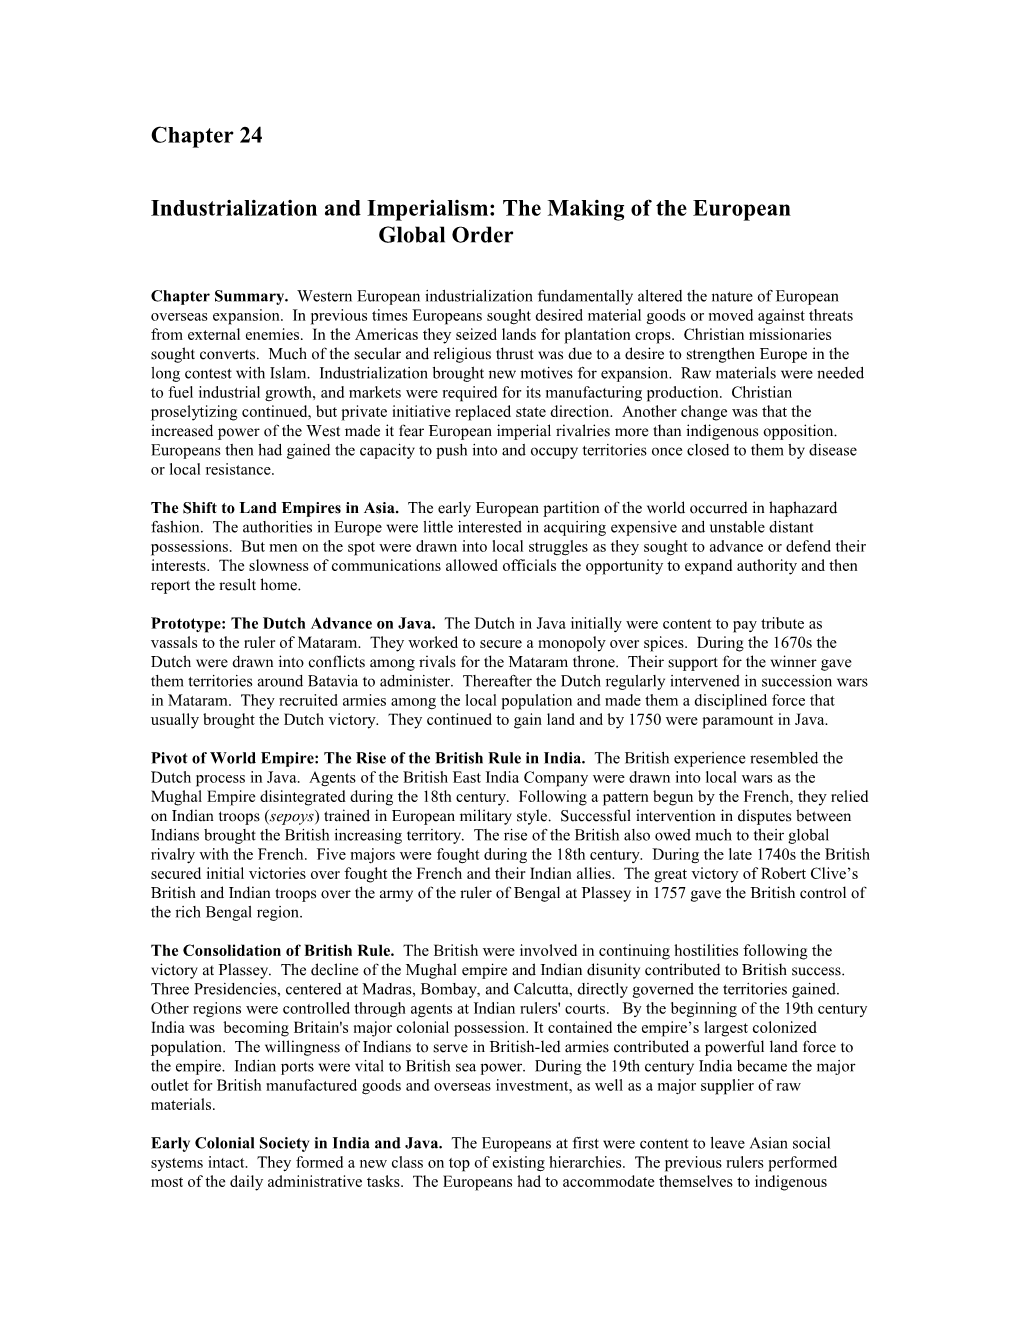 Industrialization and Imperialism: the Making of the European